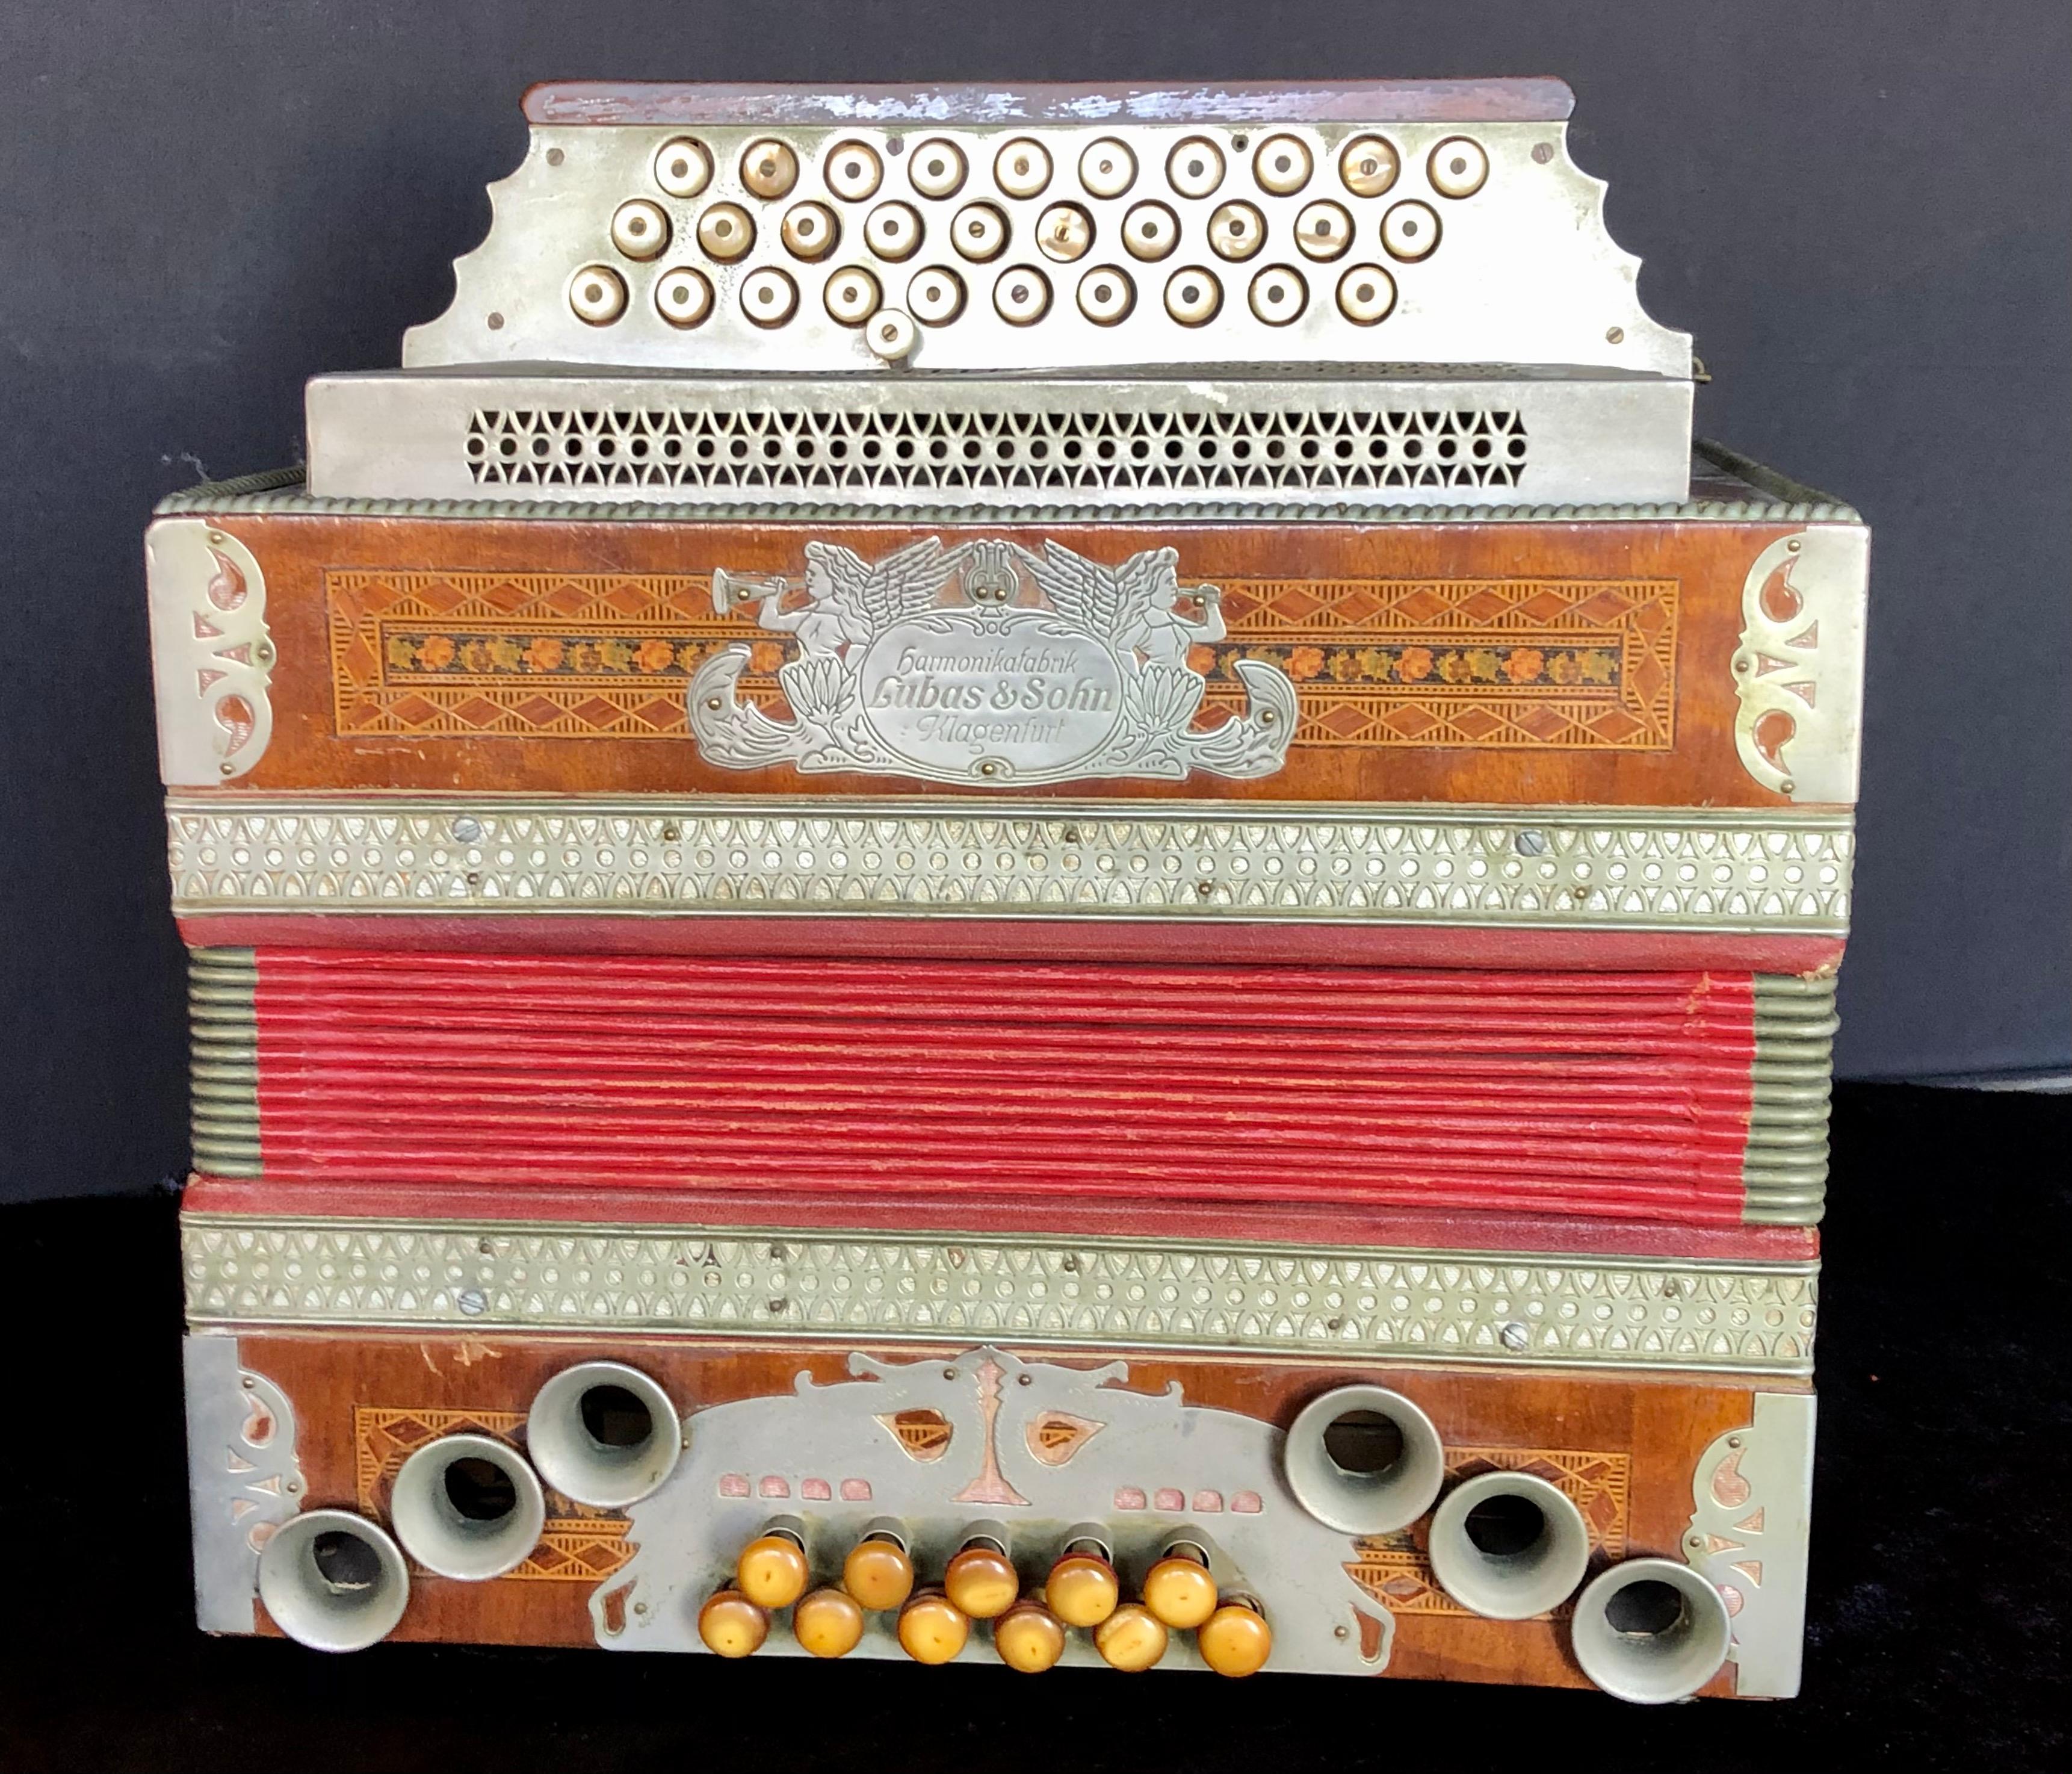 Vintage Lubas & Sohn Harmonika, Pre 1918. Good condition, playable, missing neck band. This finely crafted musical instrument is simply stunning in its marquetry inlaid case.
Price due to condition.